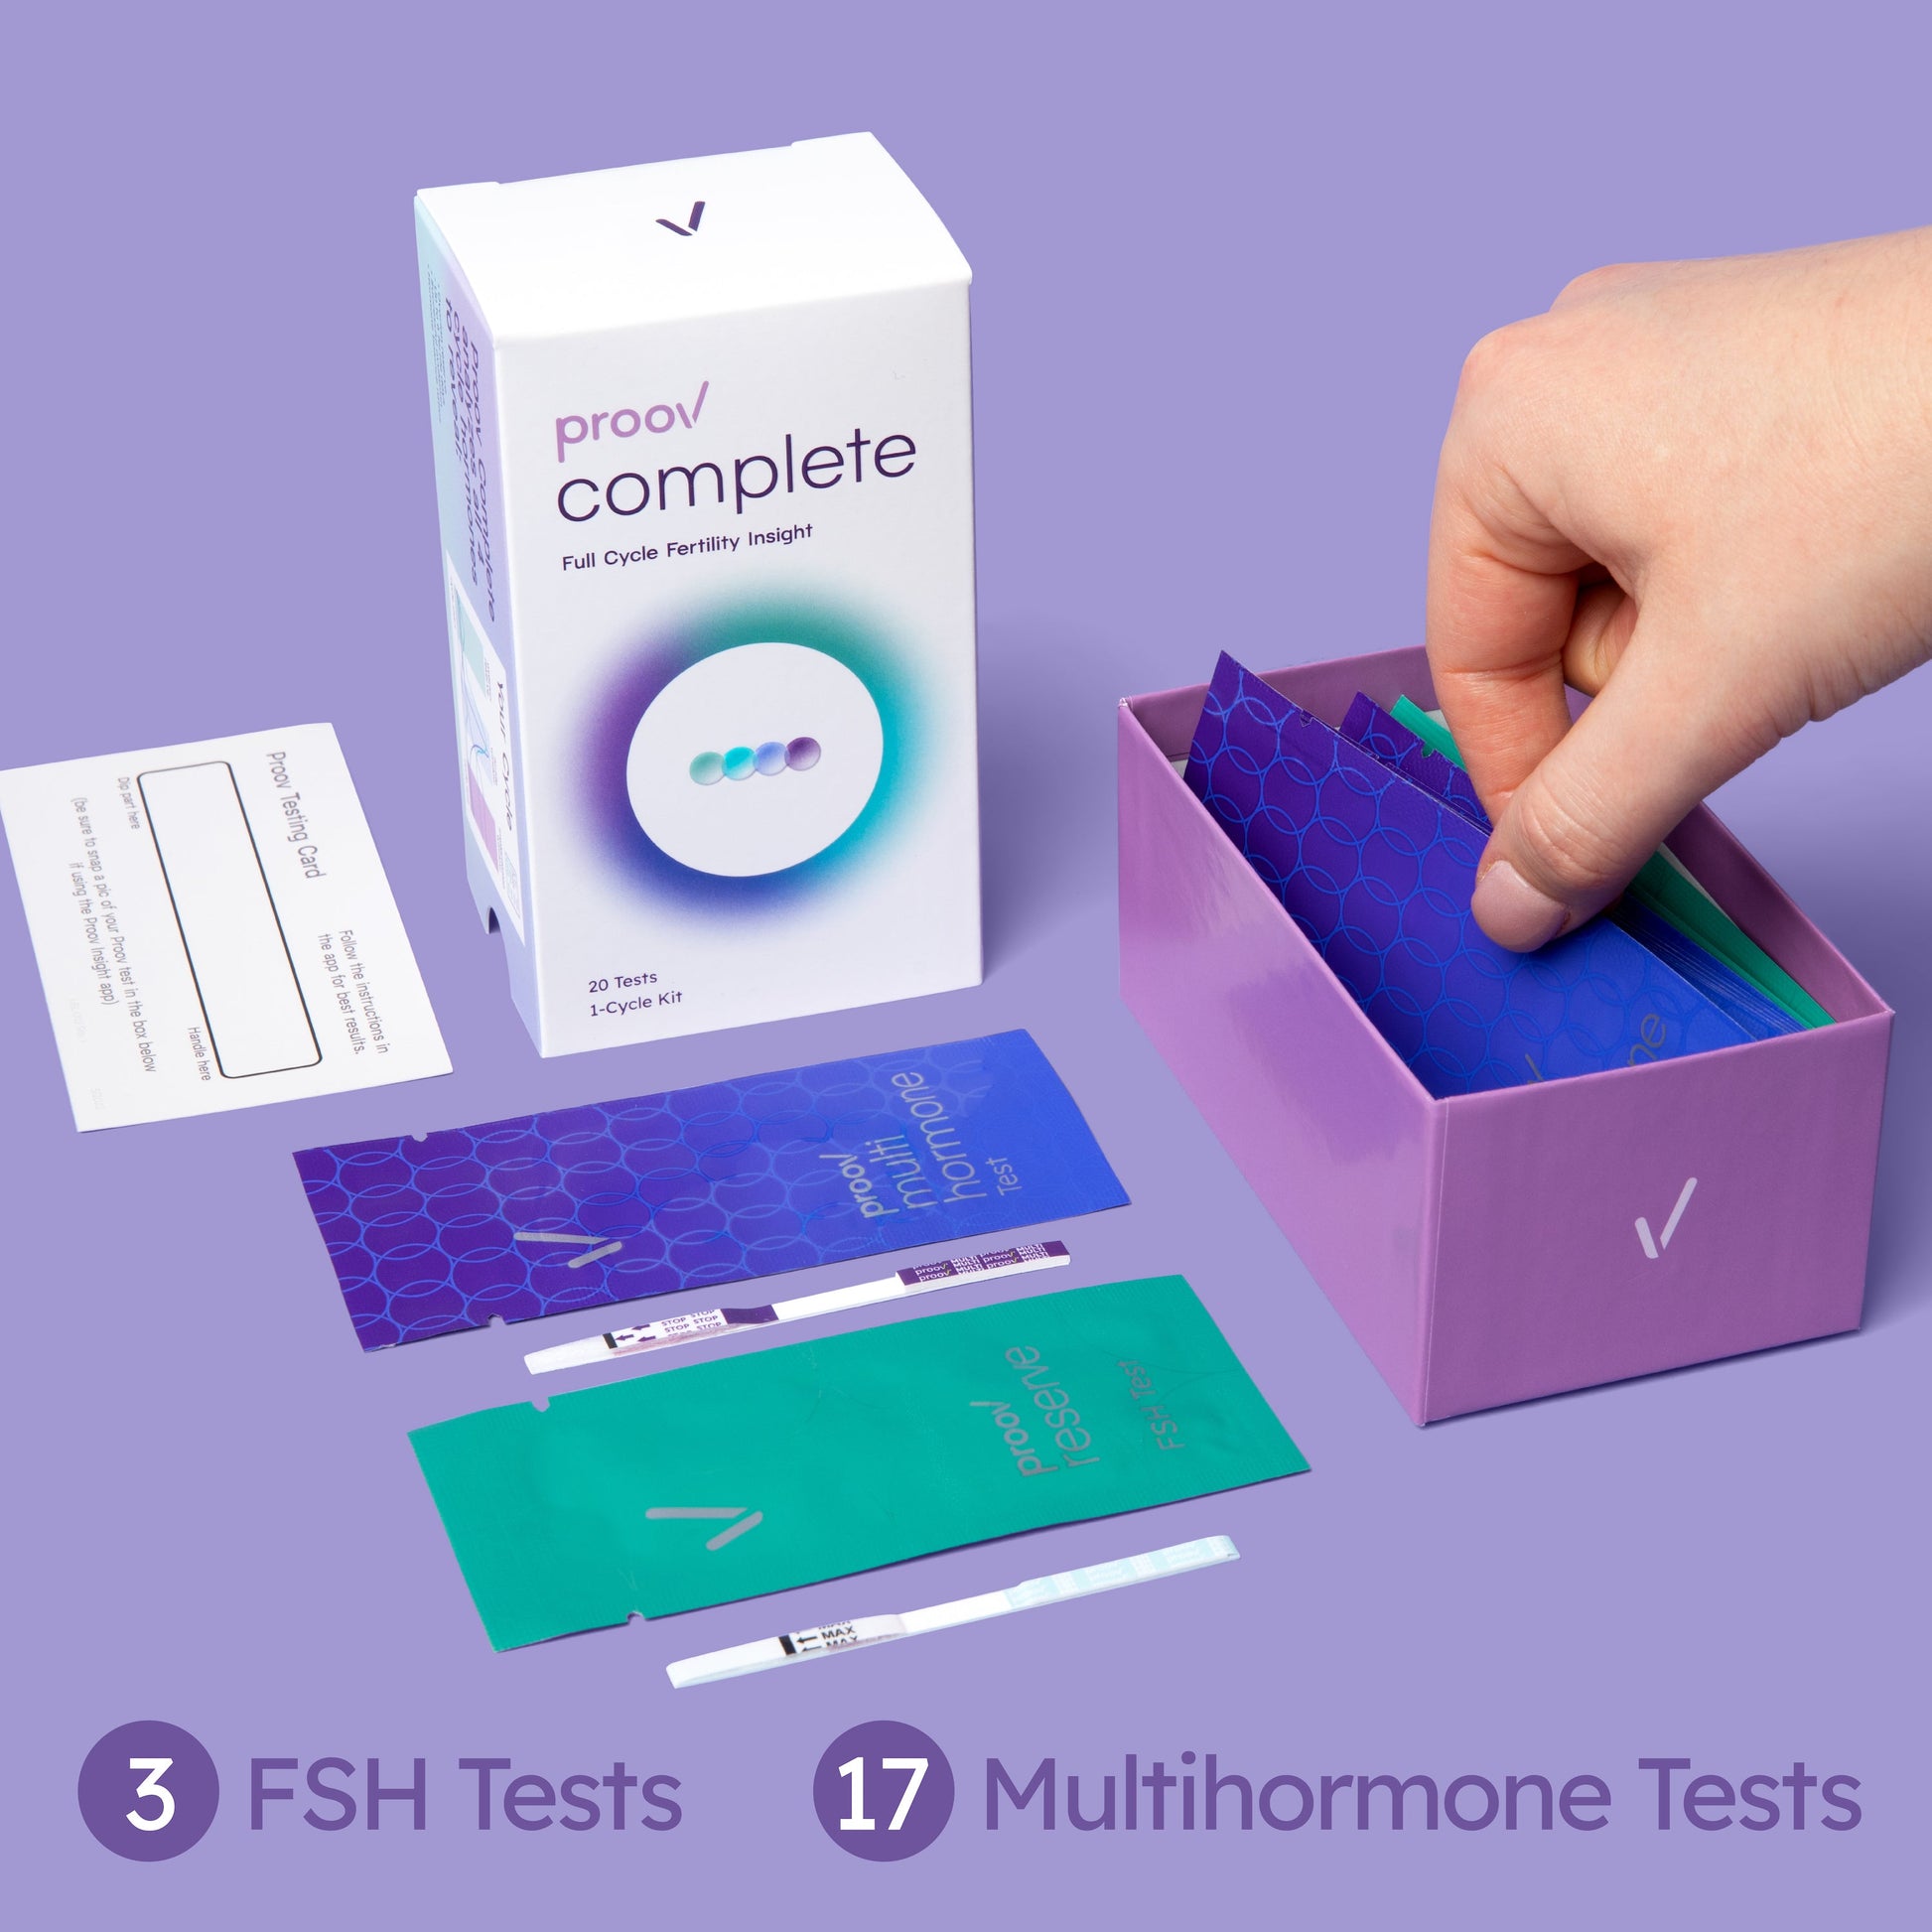 Proov Complete Fertility Insight Box open showing the tests.